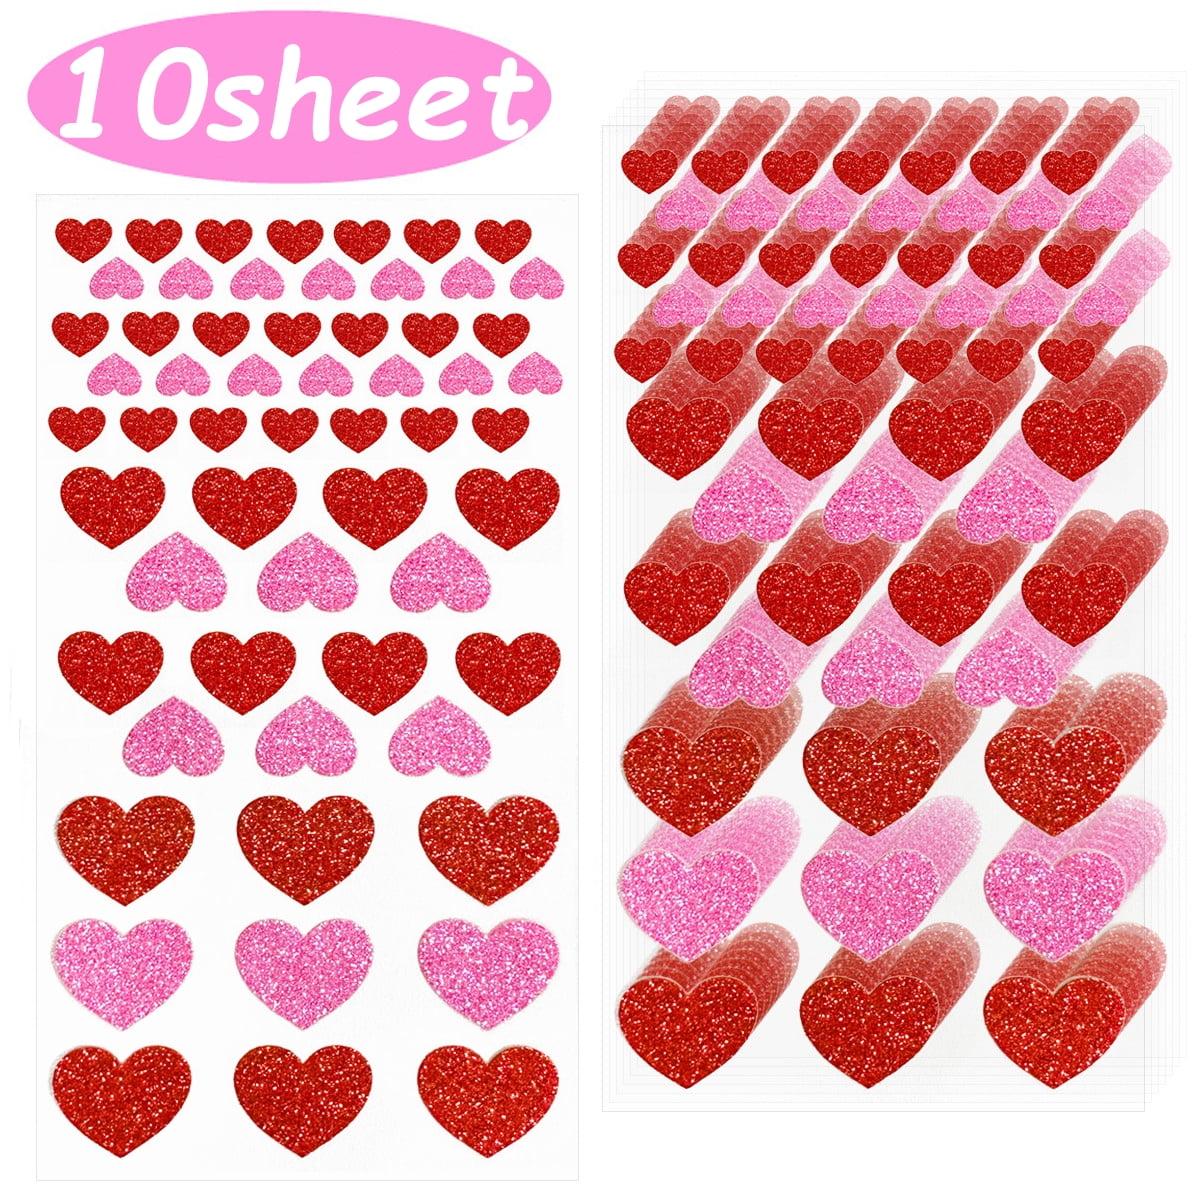 Glitter Foam Stickers - Hearts - Red, Pink and Silver - Pack of 168